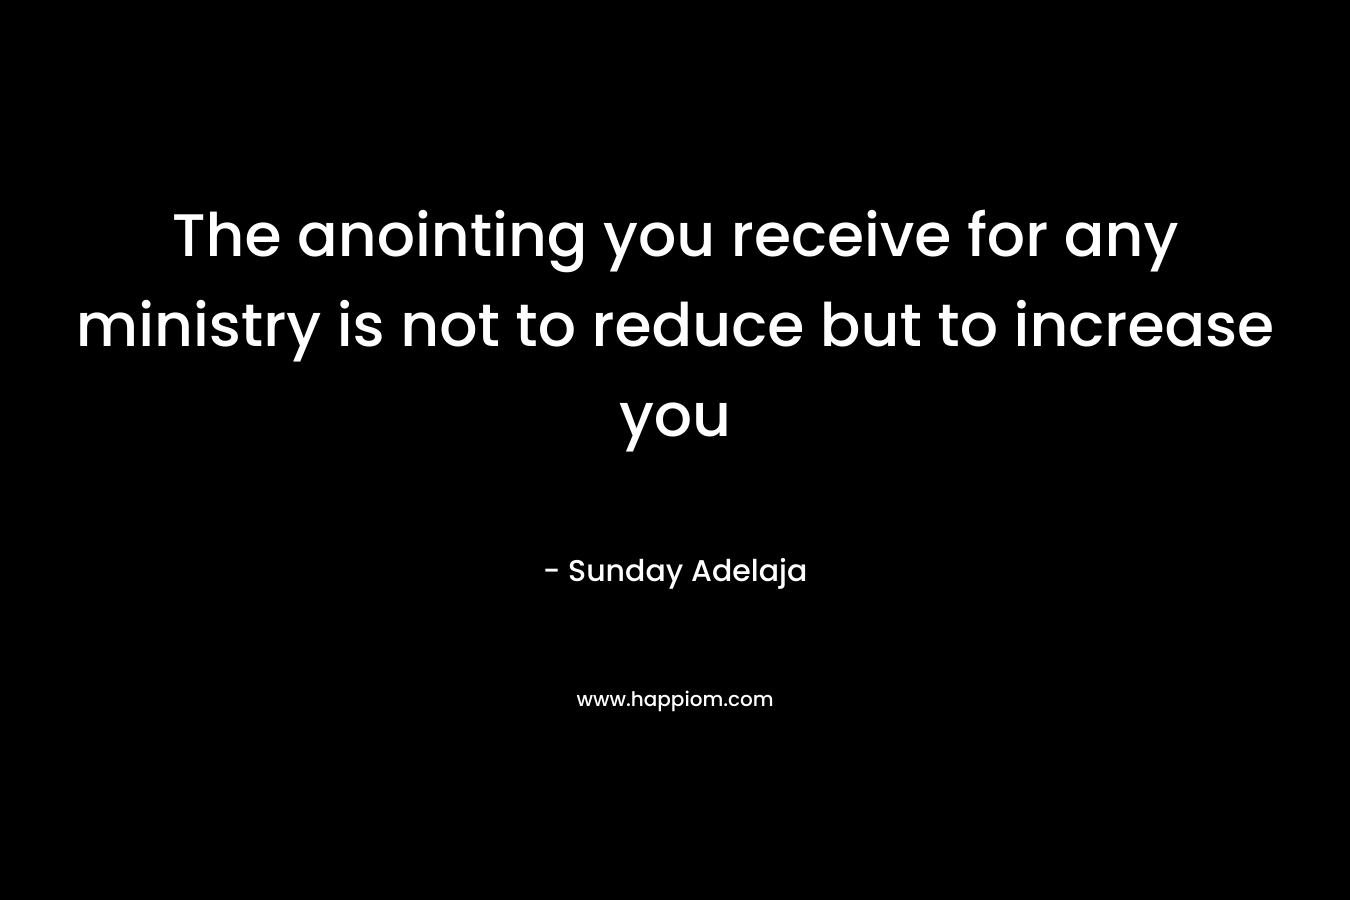 The anointing you receive for any ministry is not to reduce but to increase you